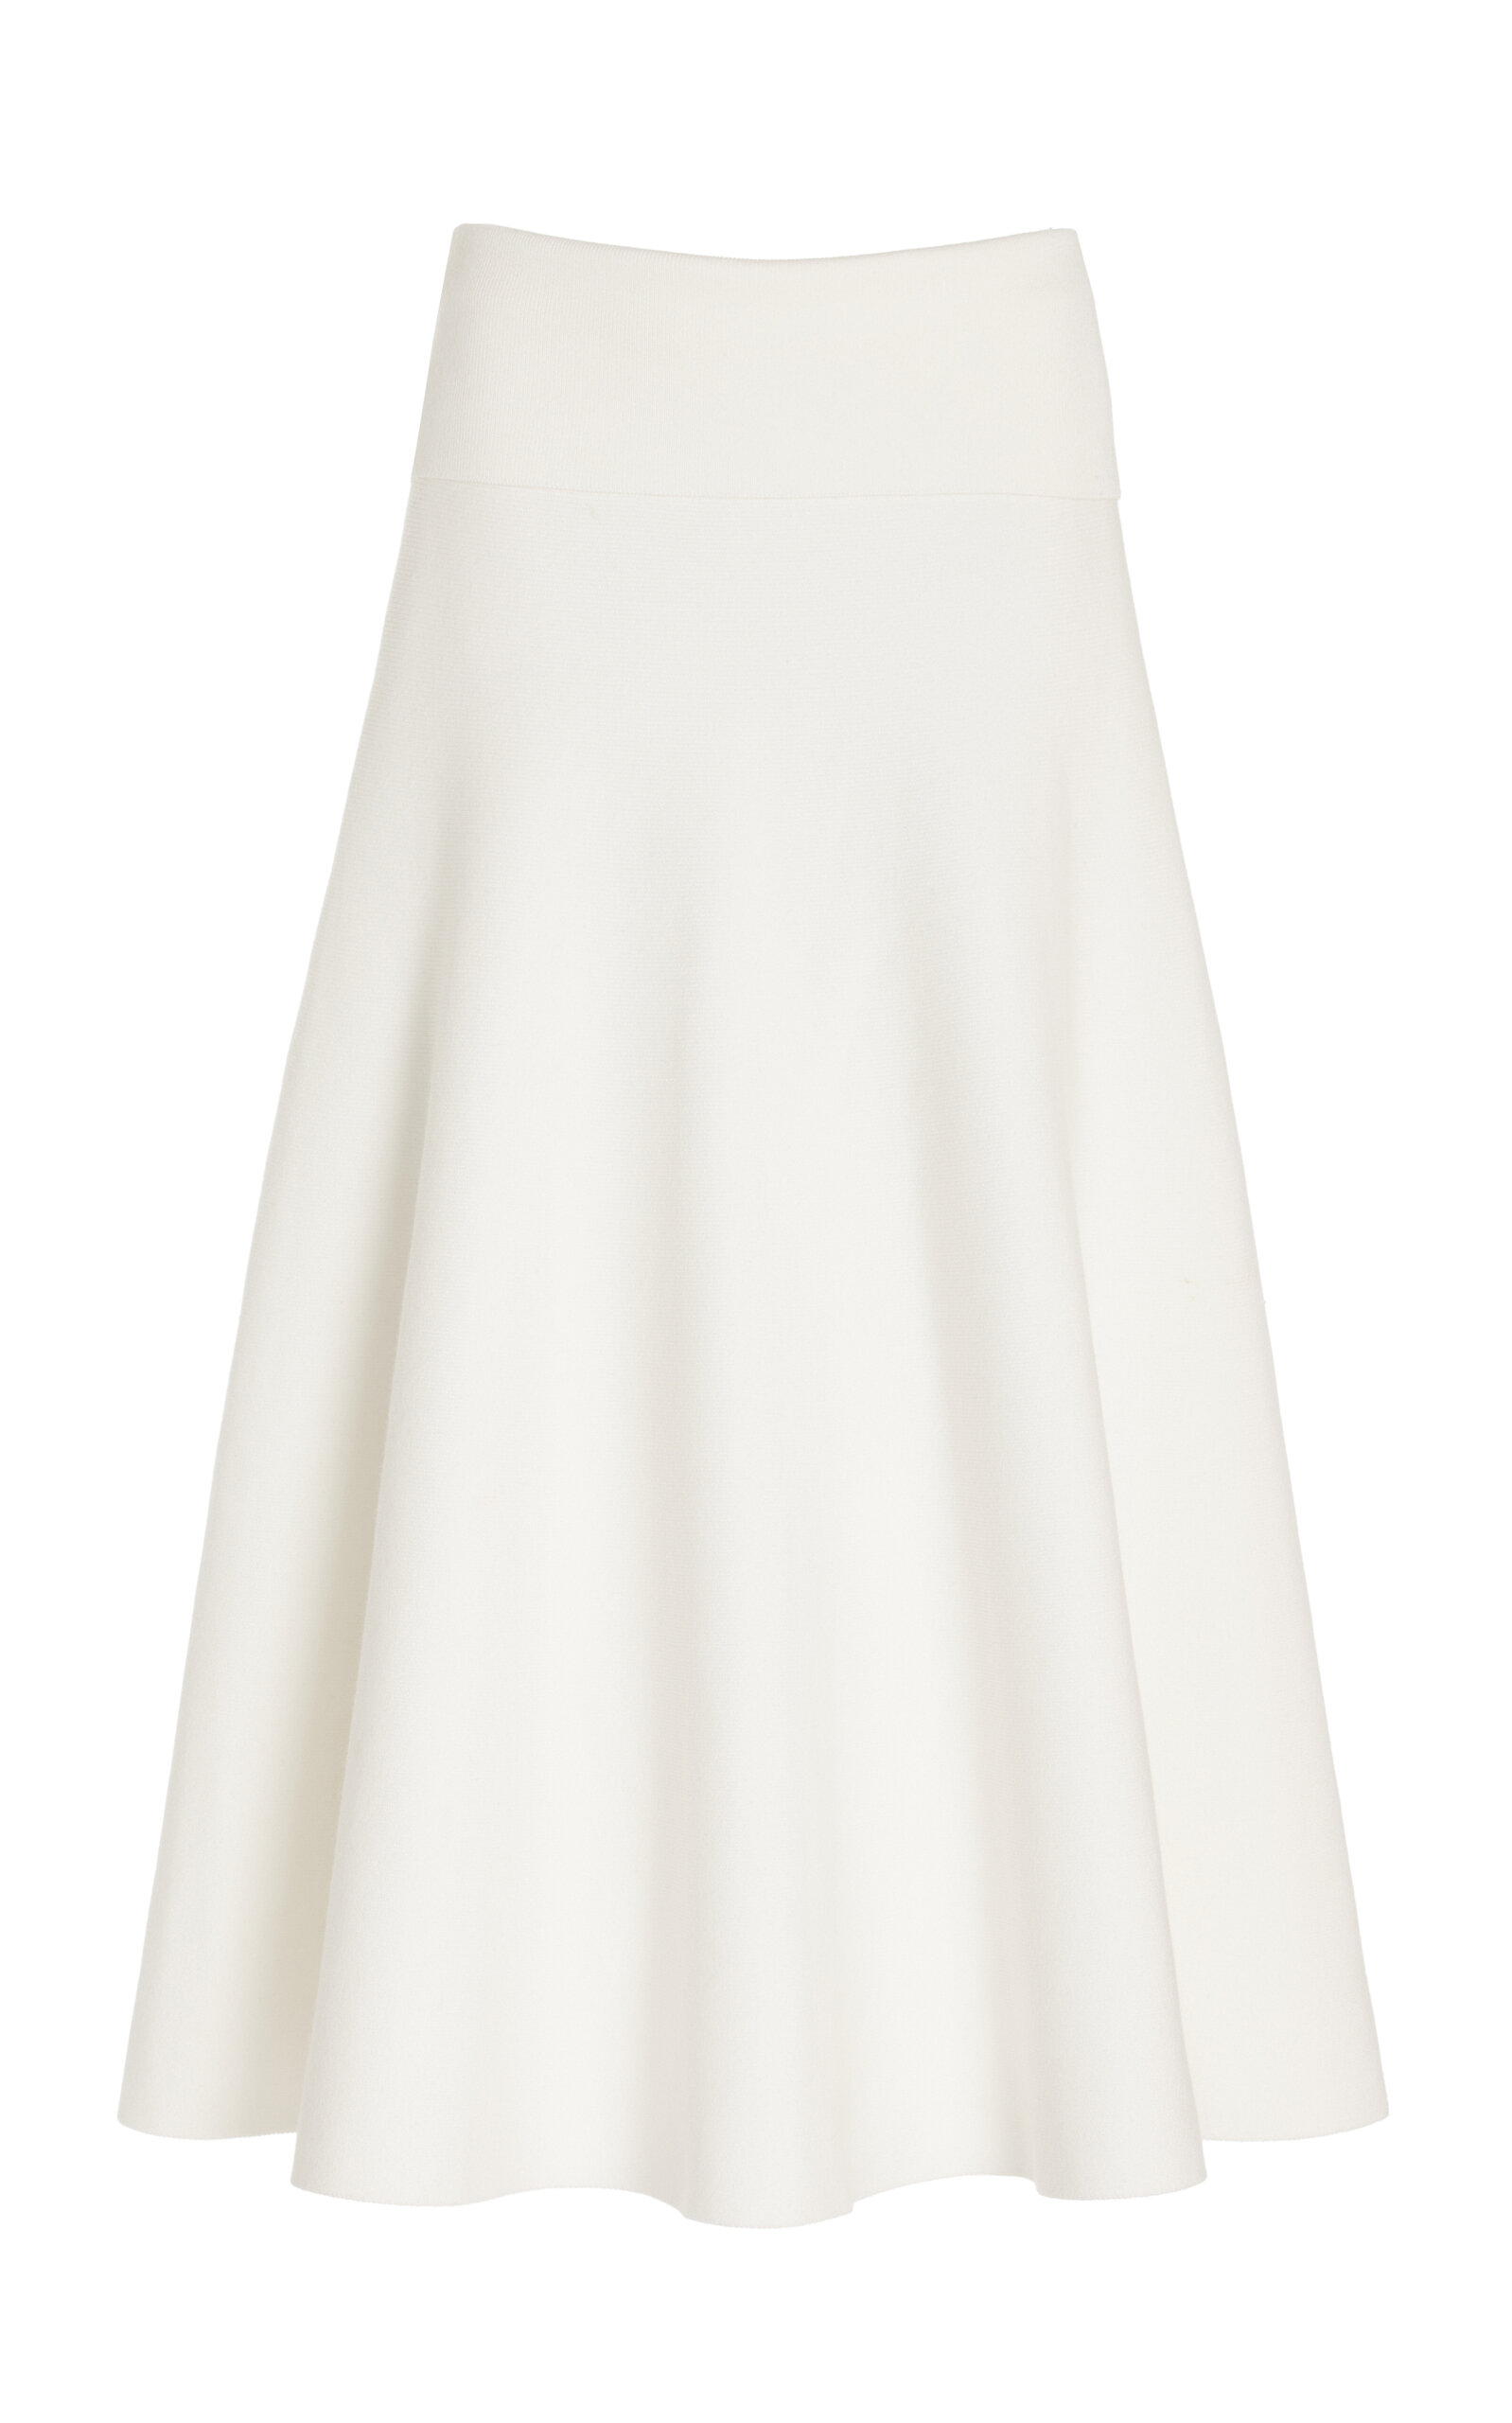 Shop The Frankie Shop Exclusive Gabrielle Knit Midi Skirt In White